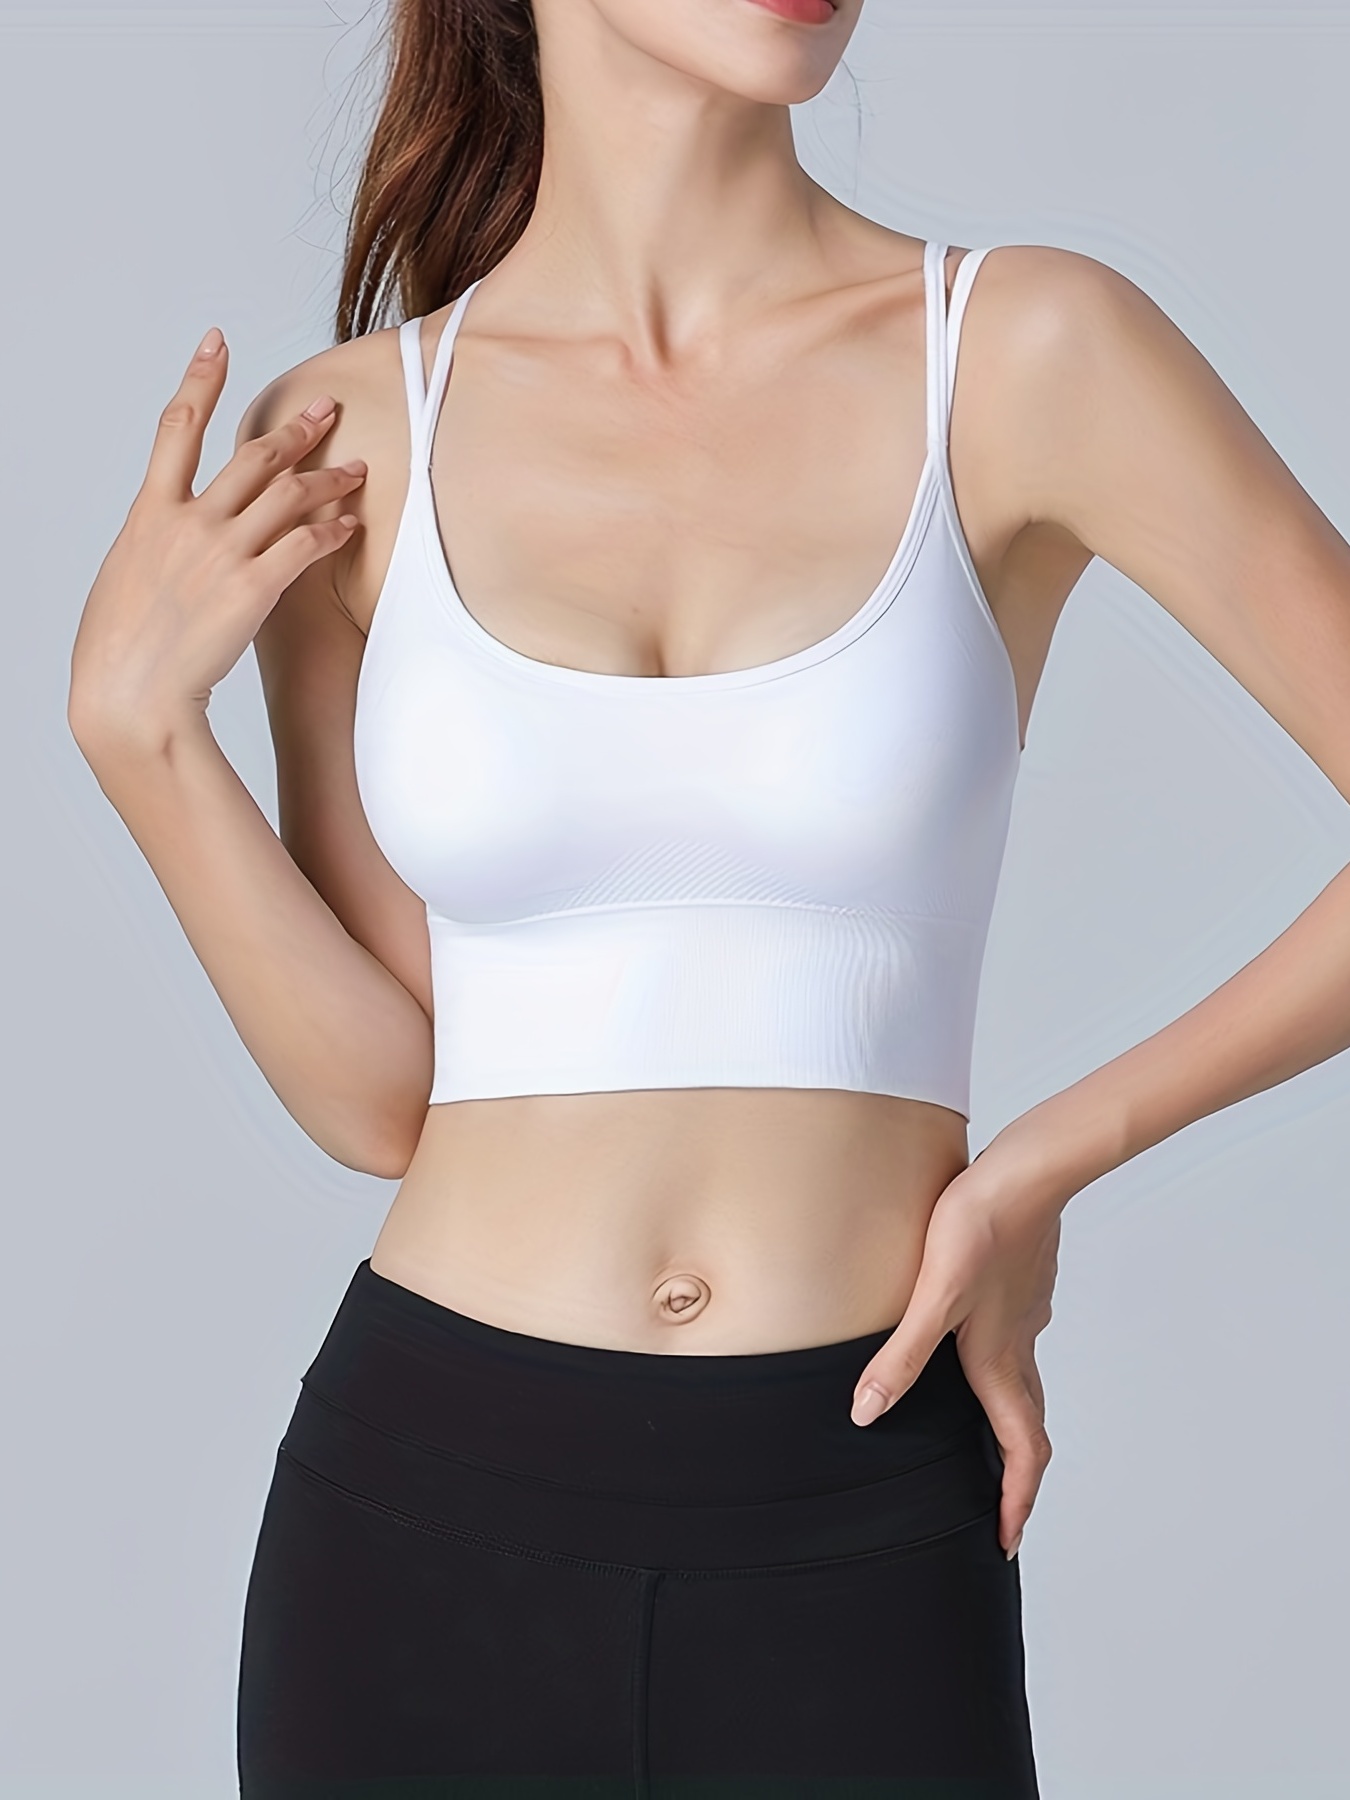 Look & Feel Fabulous in This White Double Straps Sports Bra - Seamless Push  Up Criss Cross Backless Yoga Tank Top for Women's Activewear